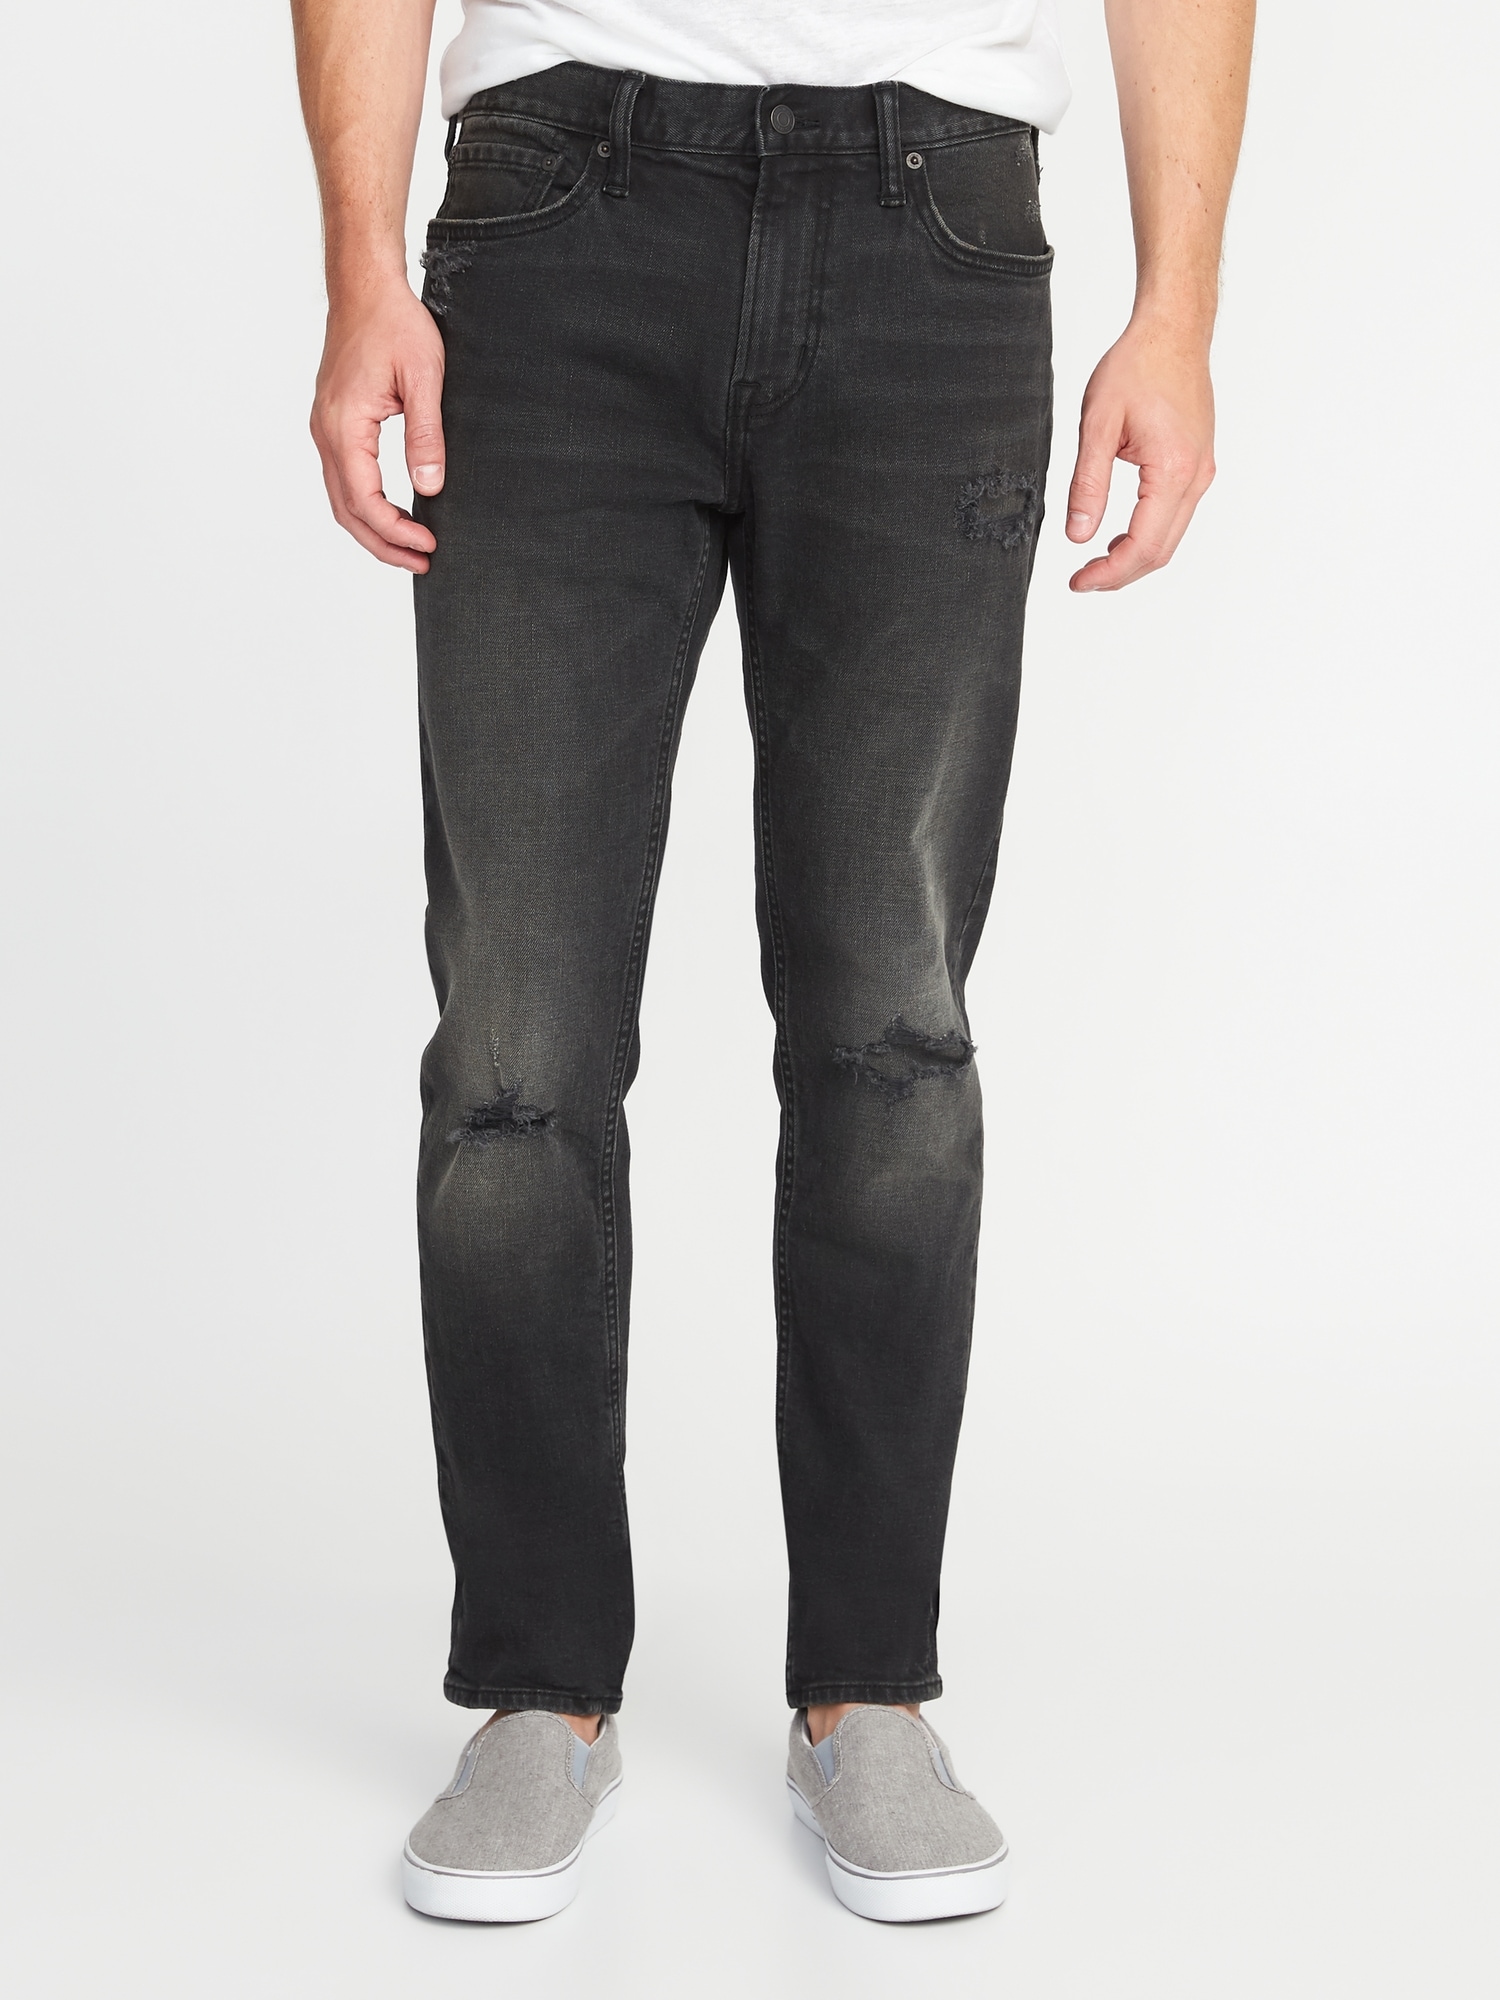 old navy mens distressed jeans